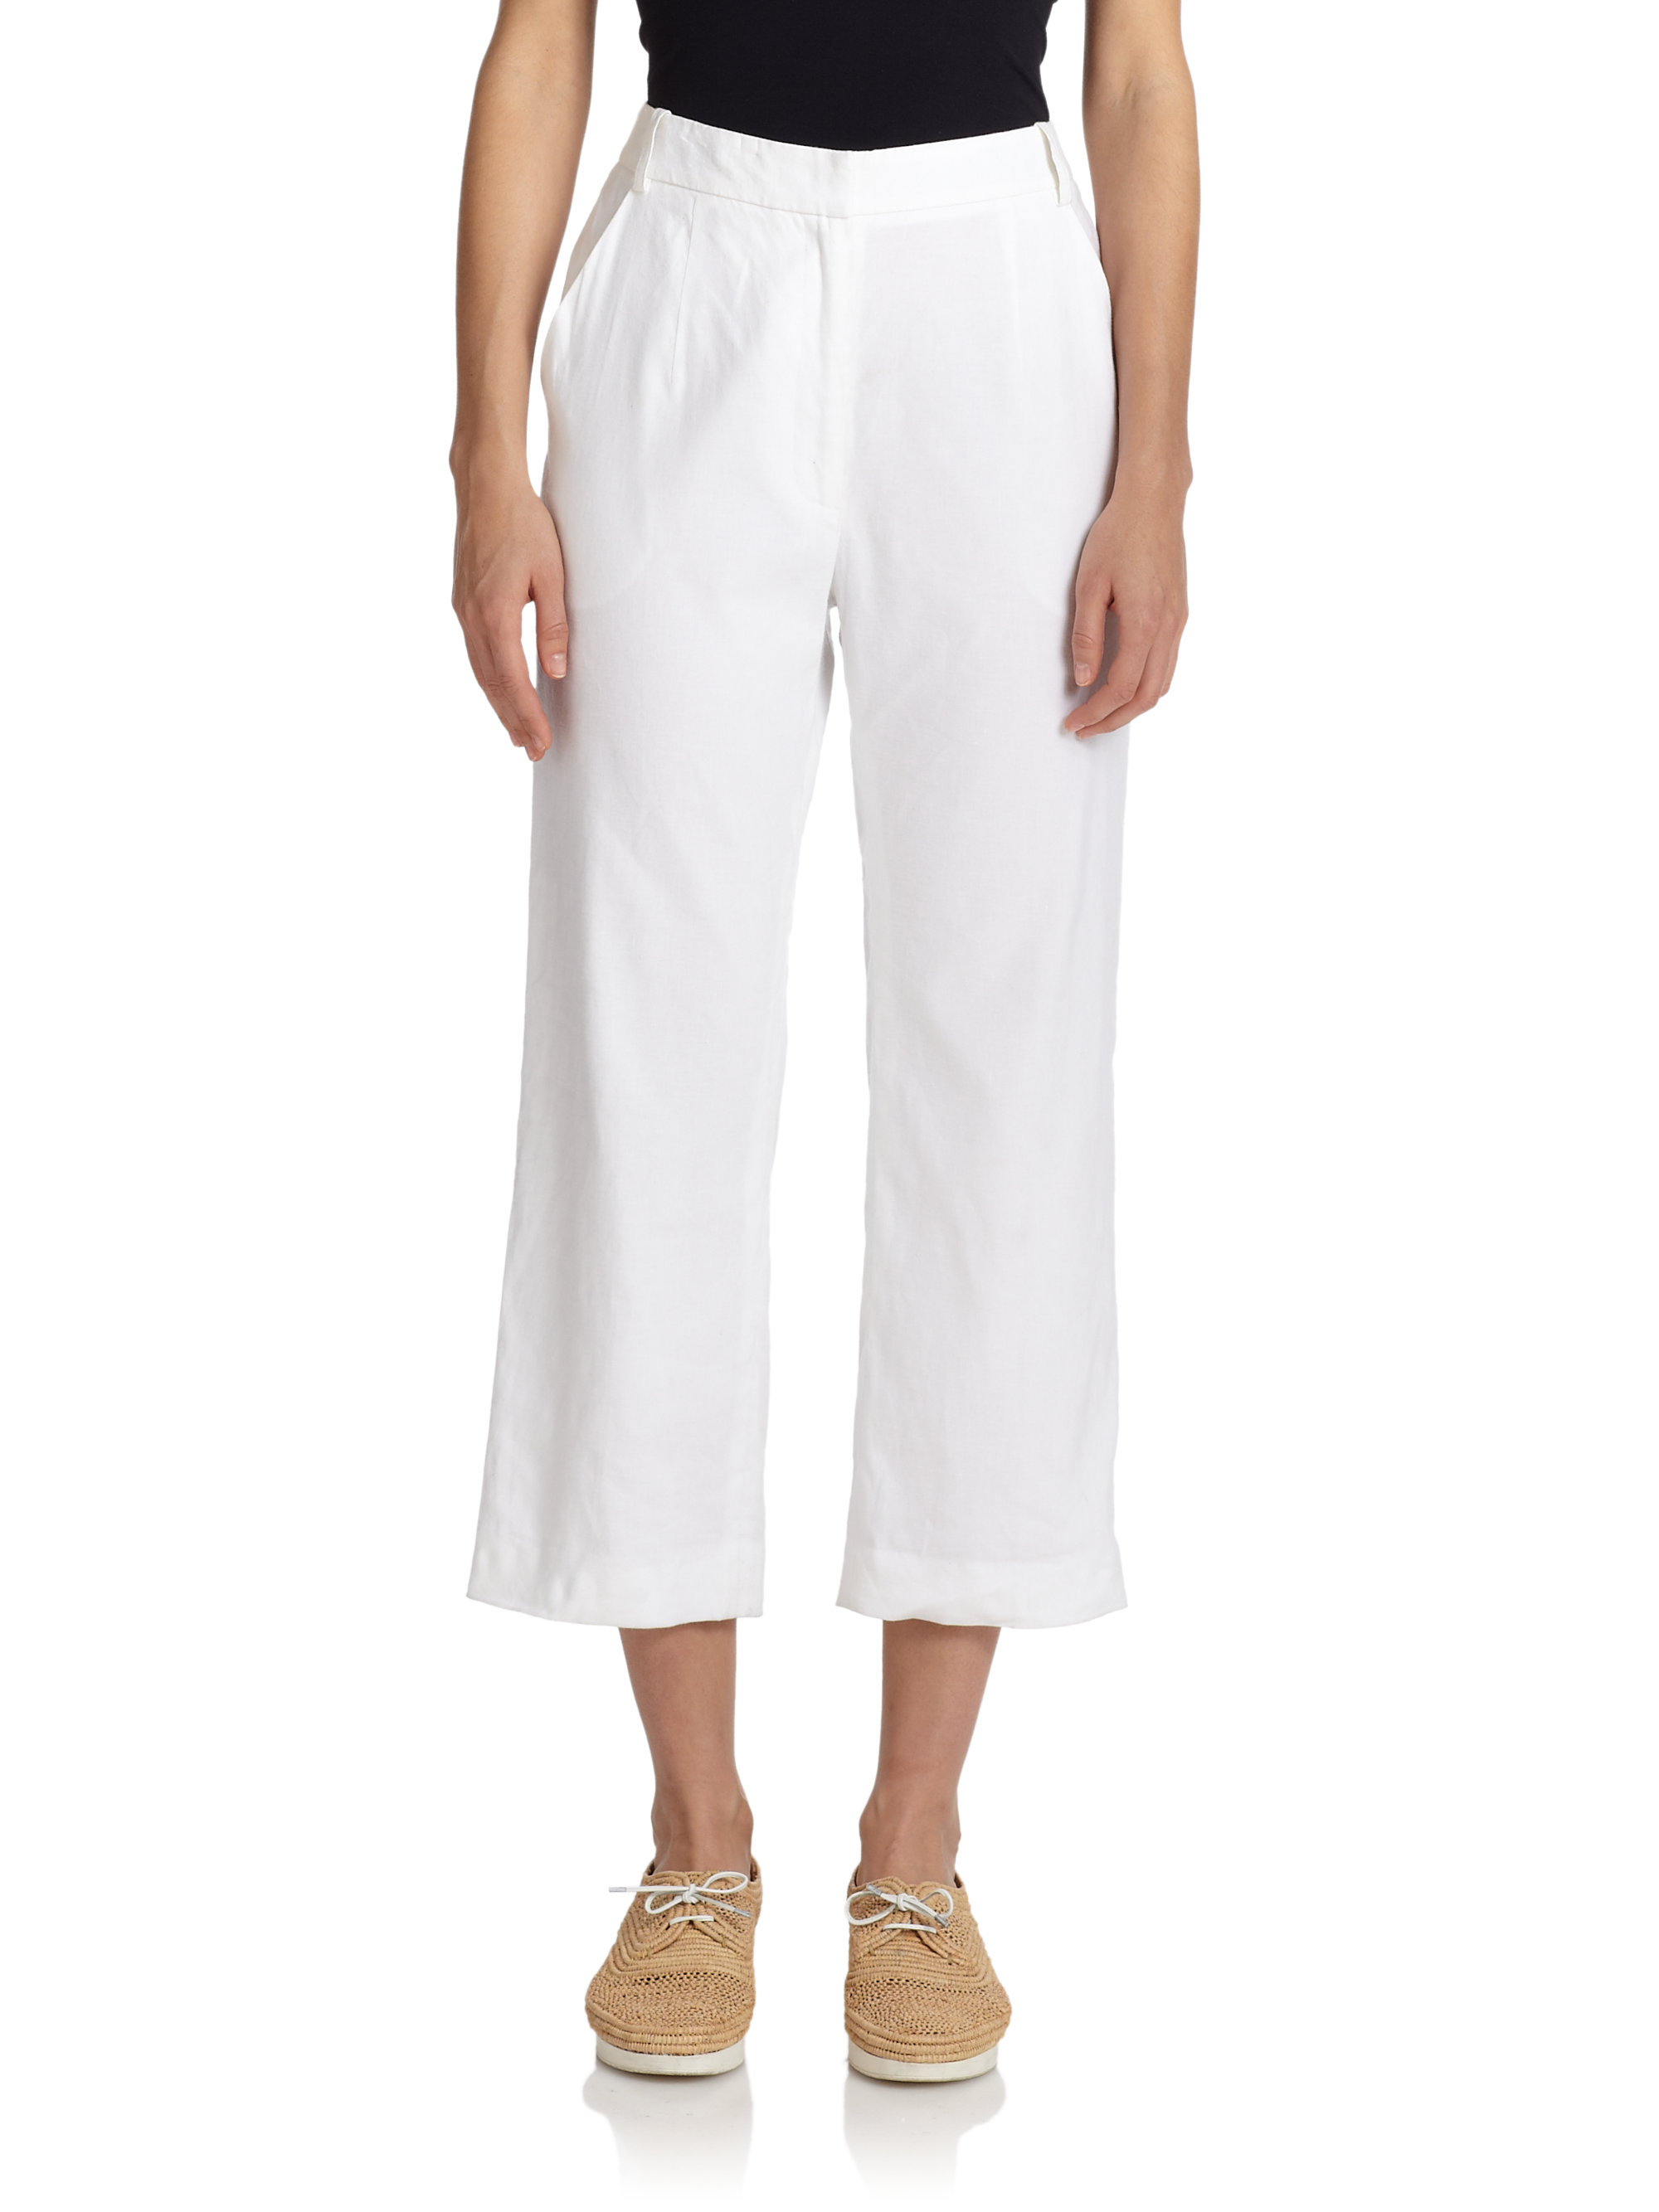 Lyst - Suno Cropped Linen Pants in White